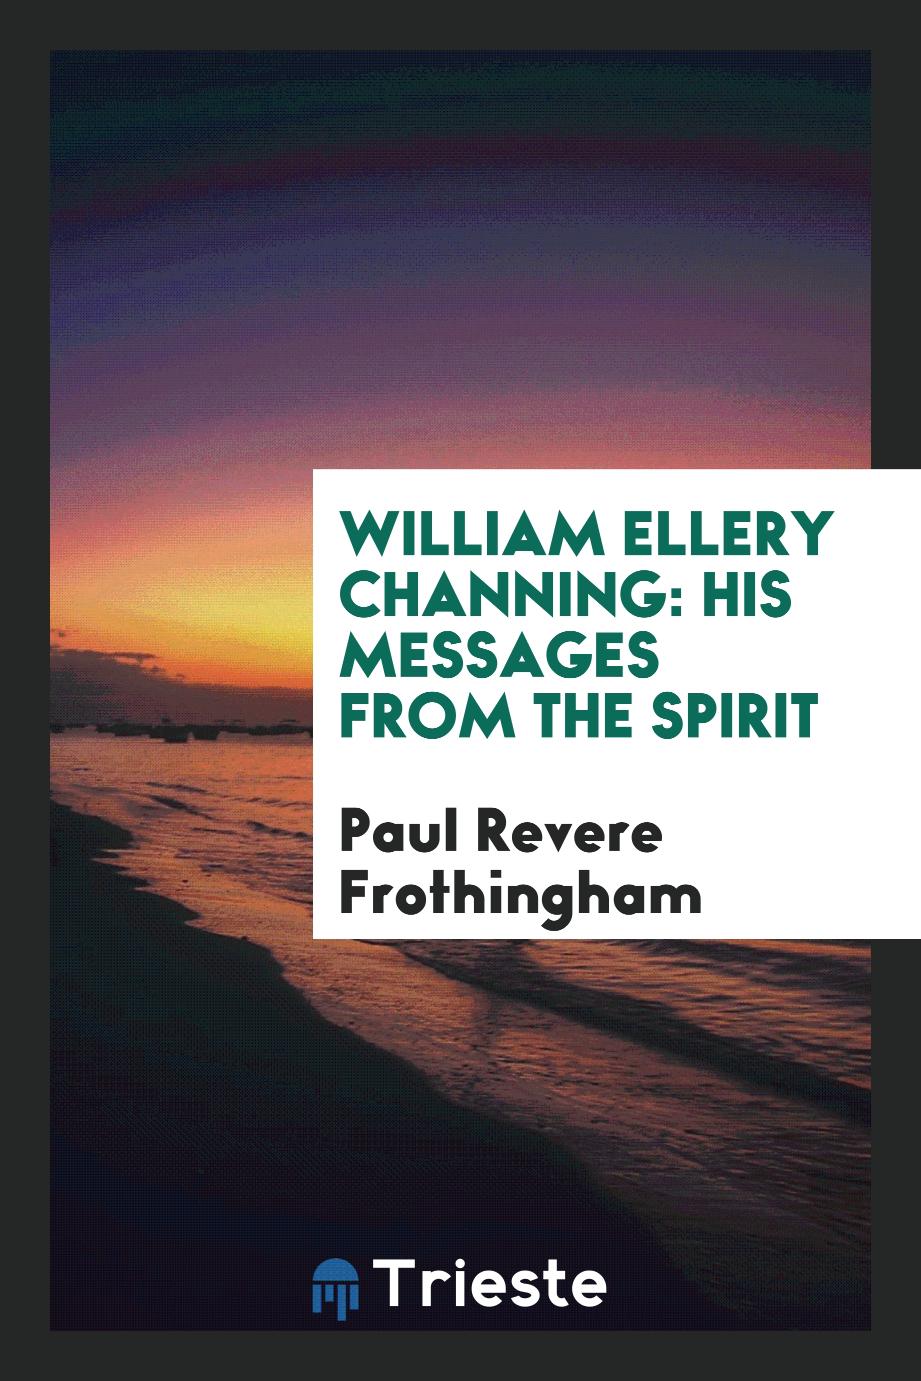 William Ellery Channing: His Messages from the Spirit